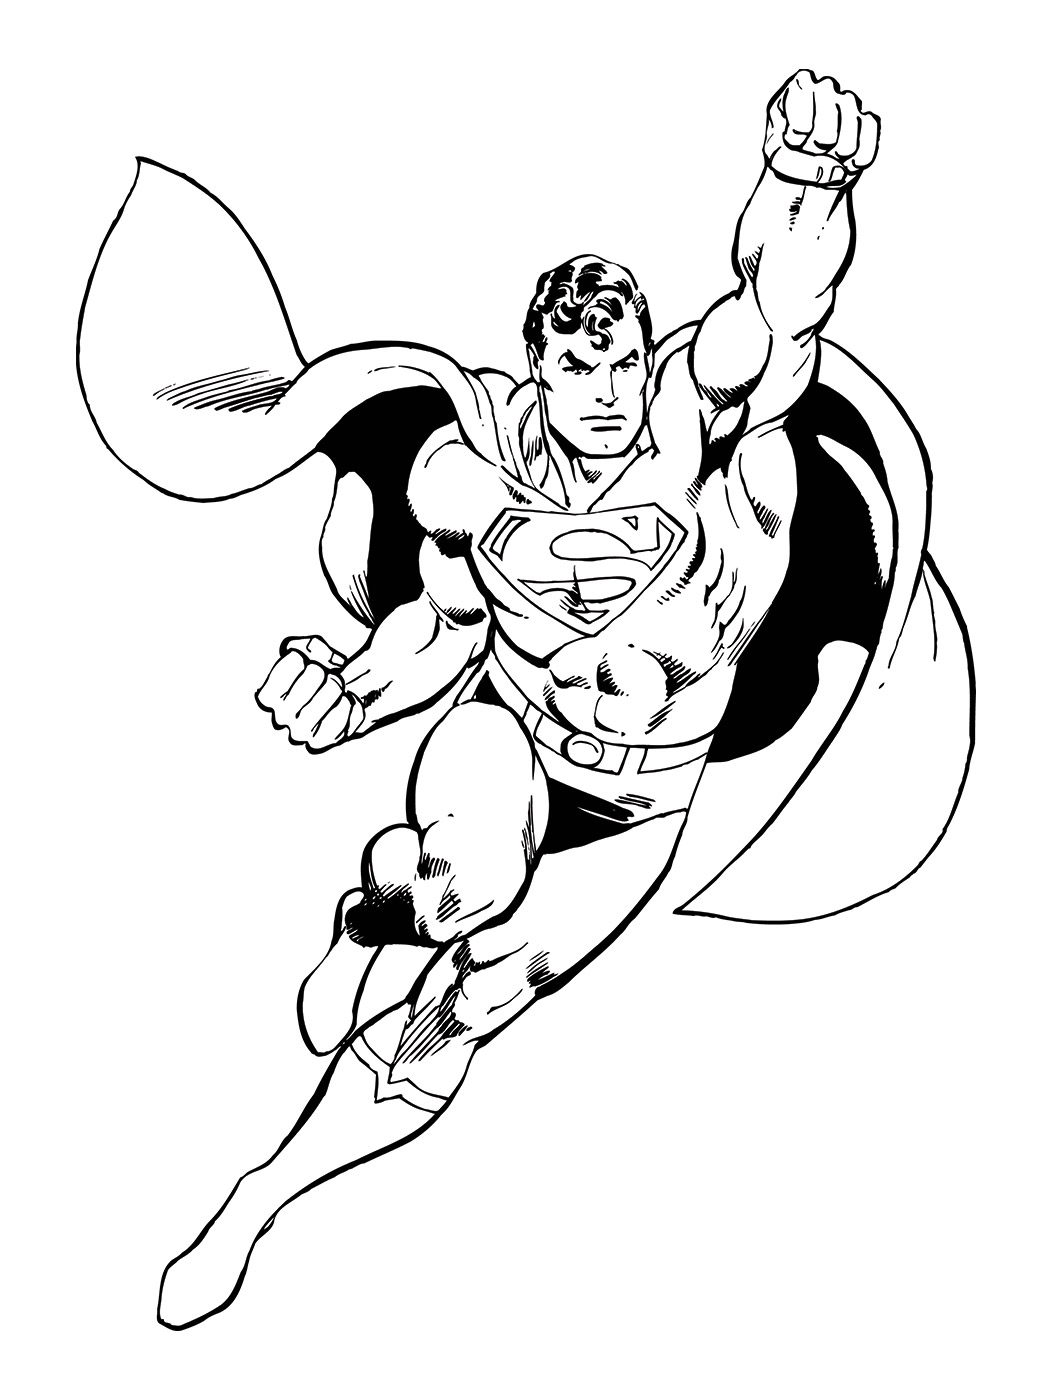 Superman Flying Pose by Garcia-Lopez